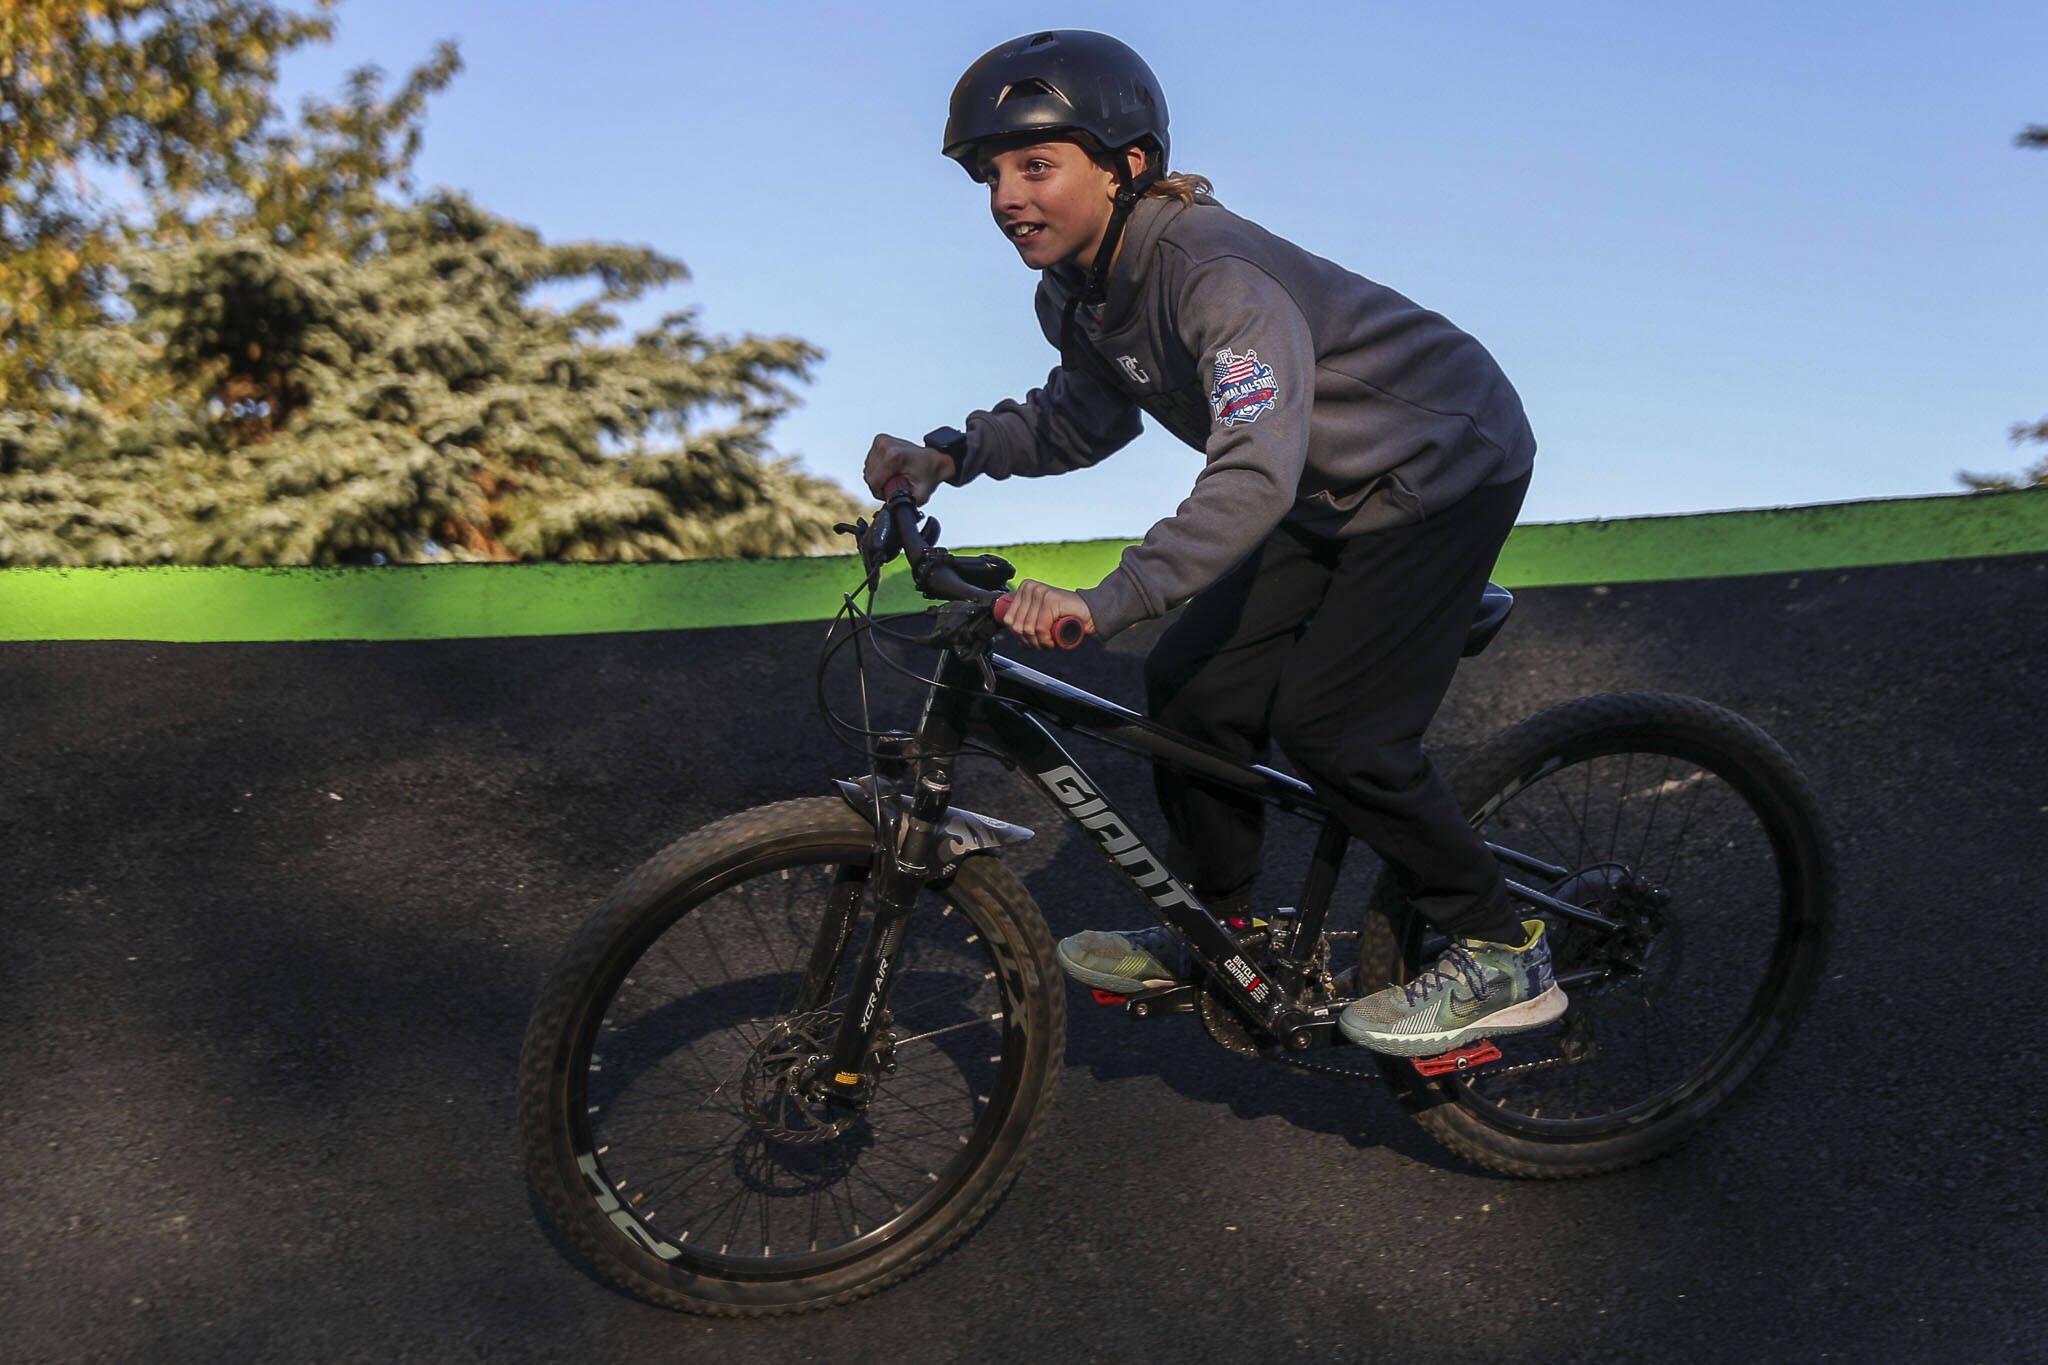 Landon Oliphant, 10, rides a new pump track for bikes at Jennings Nature Park in Marysville. (Annie Barker / The Herald)